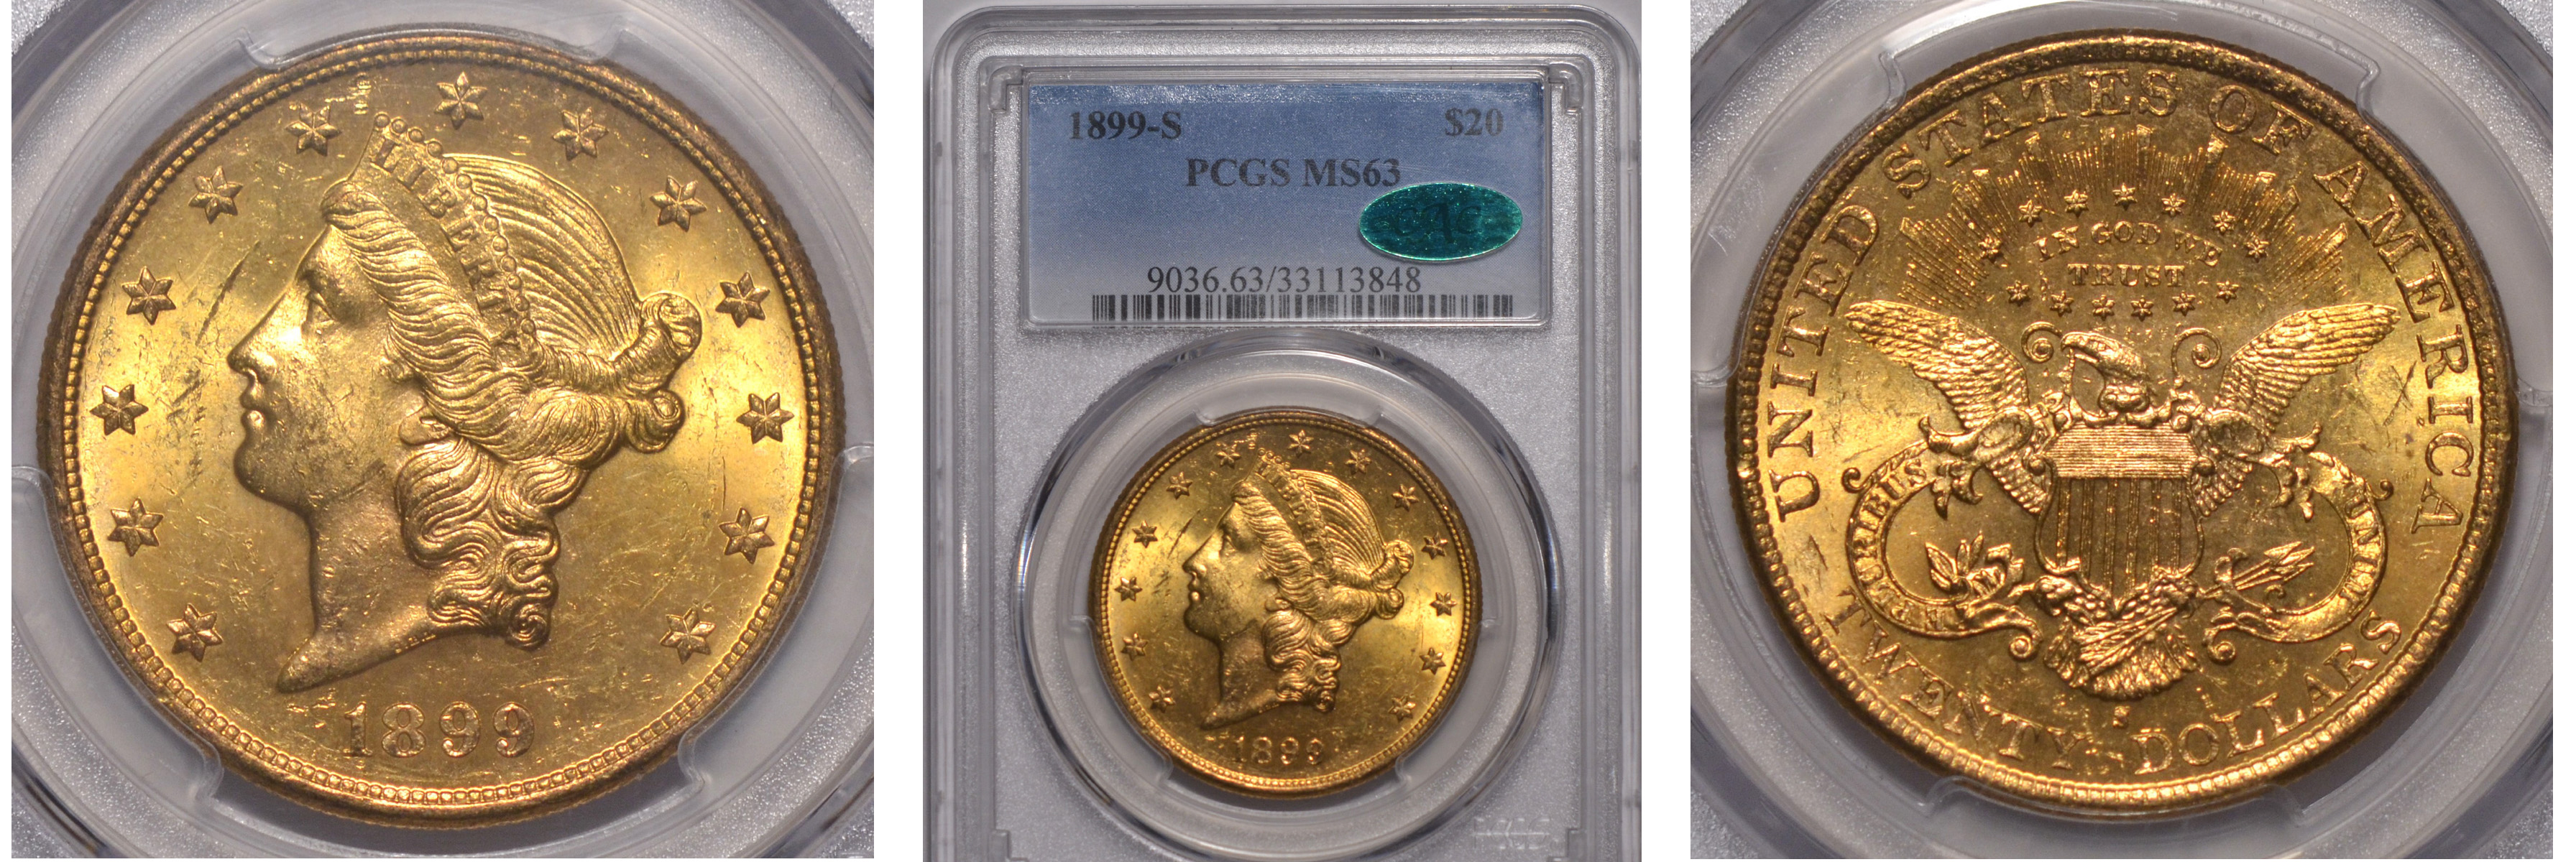 1899-S Gold $20 Double Eagle PCGS MS63 CAC